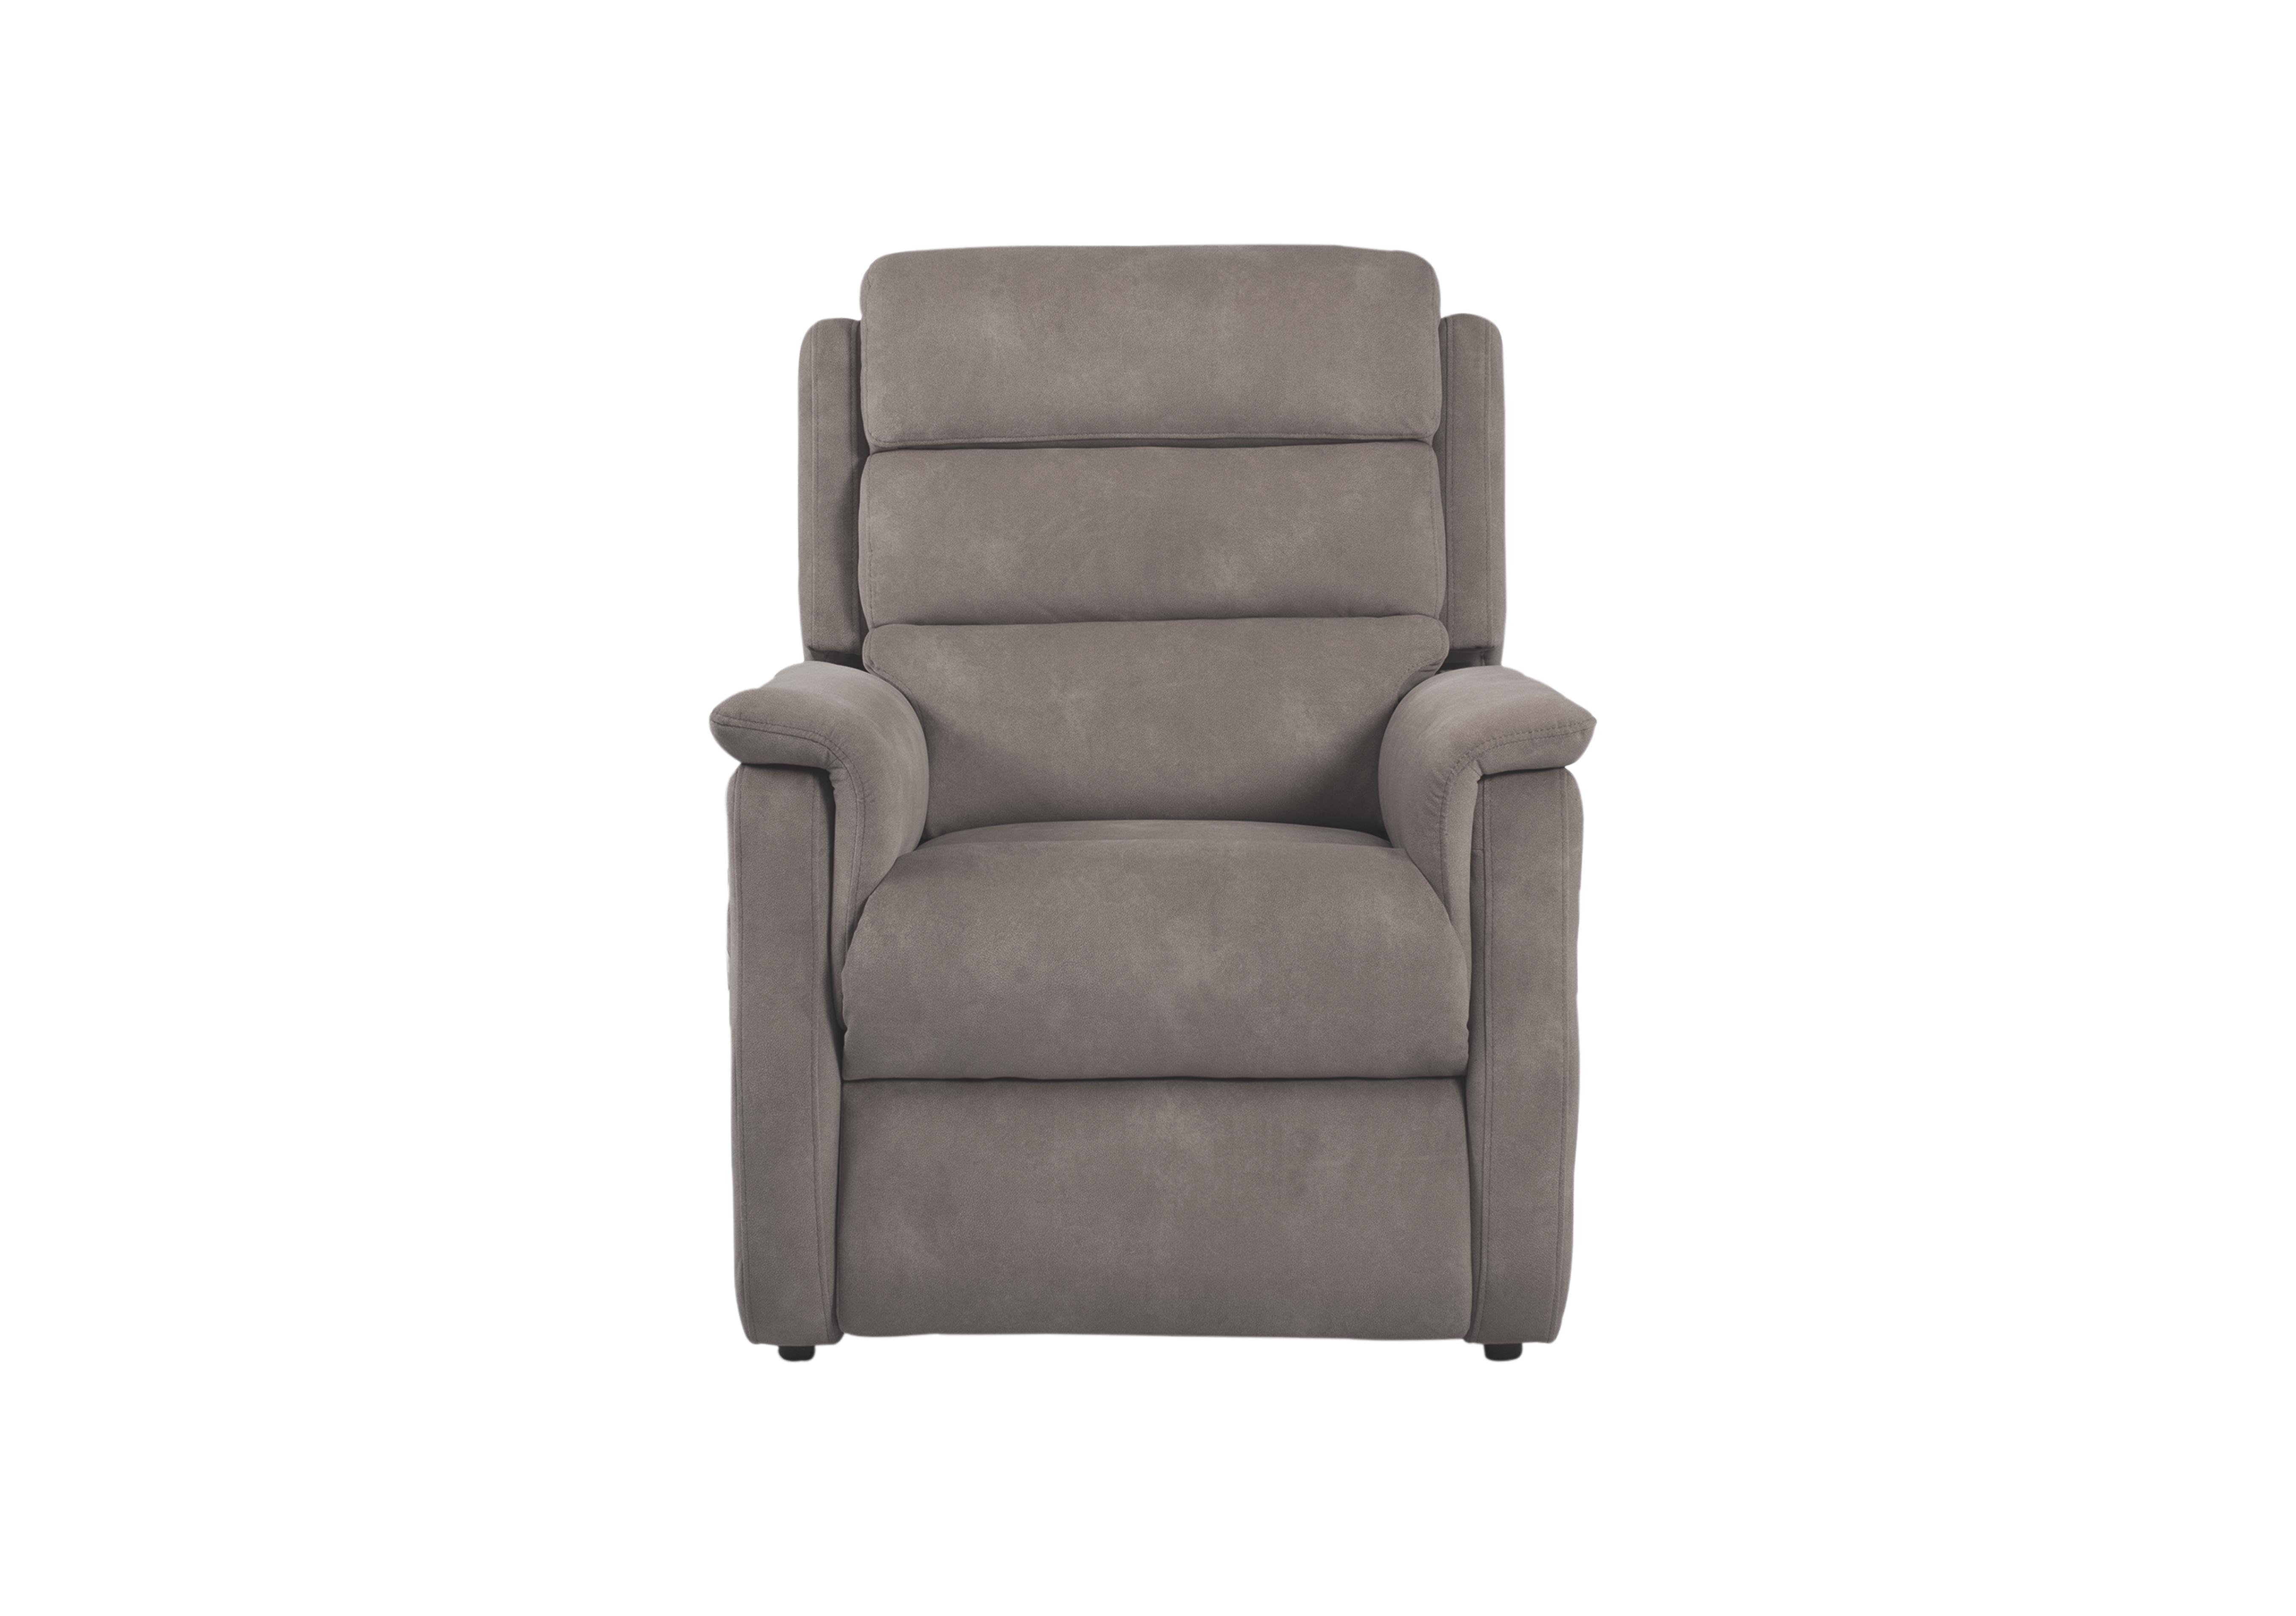 My Chair McCoy Fabric Lift and Rise Chair in 43504 Mocha Dexter 04 on Furniture Village